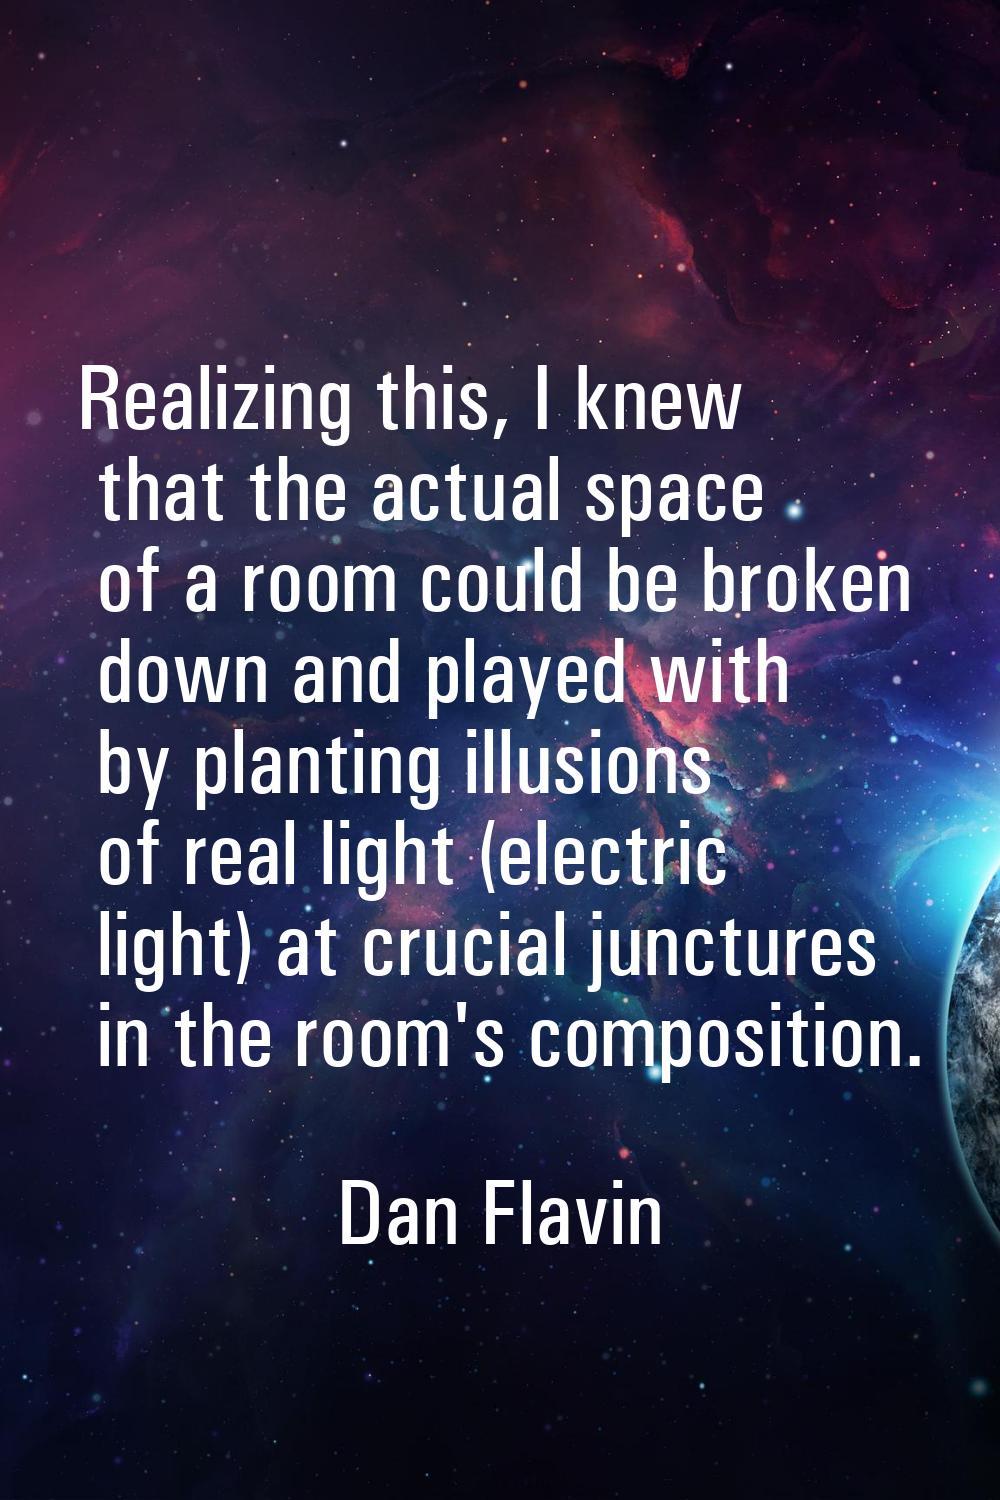 Realizing this, I knew that the actual space of a room could be broken down and played with by plan